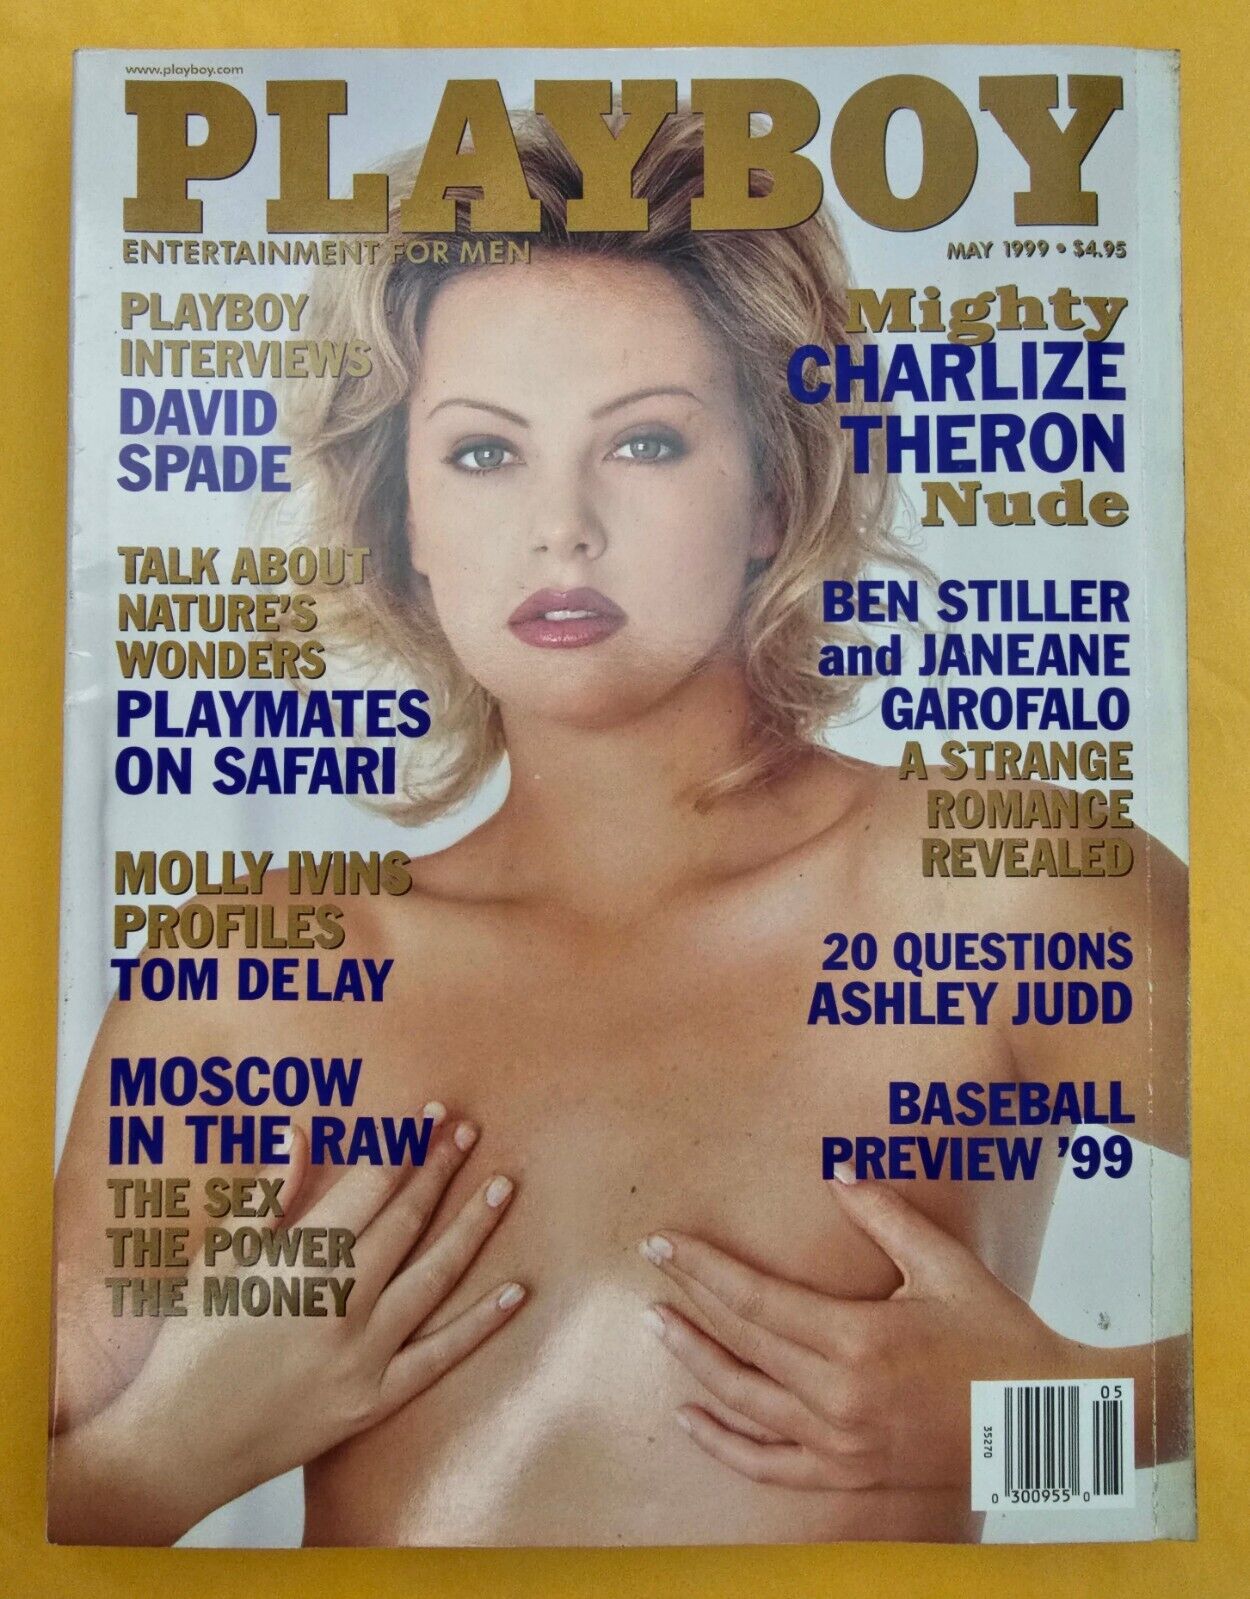 chad abate recommends Charlize Theron Playboy